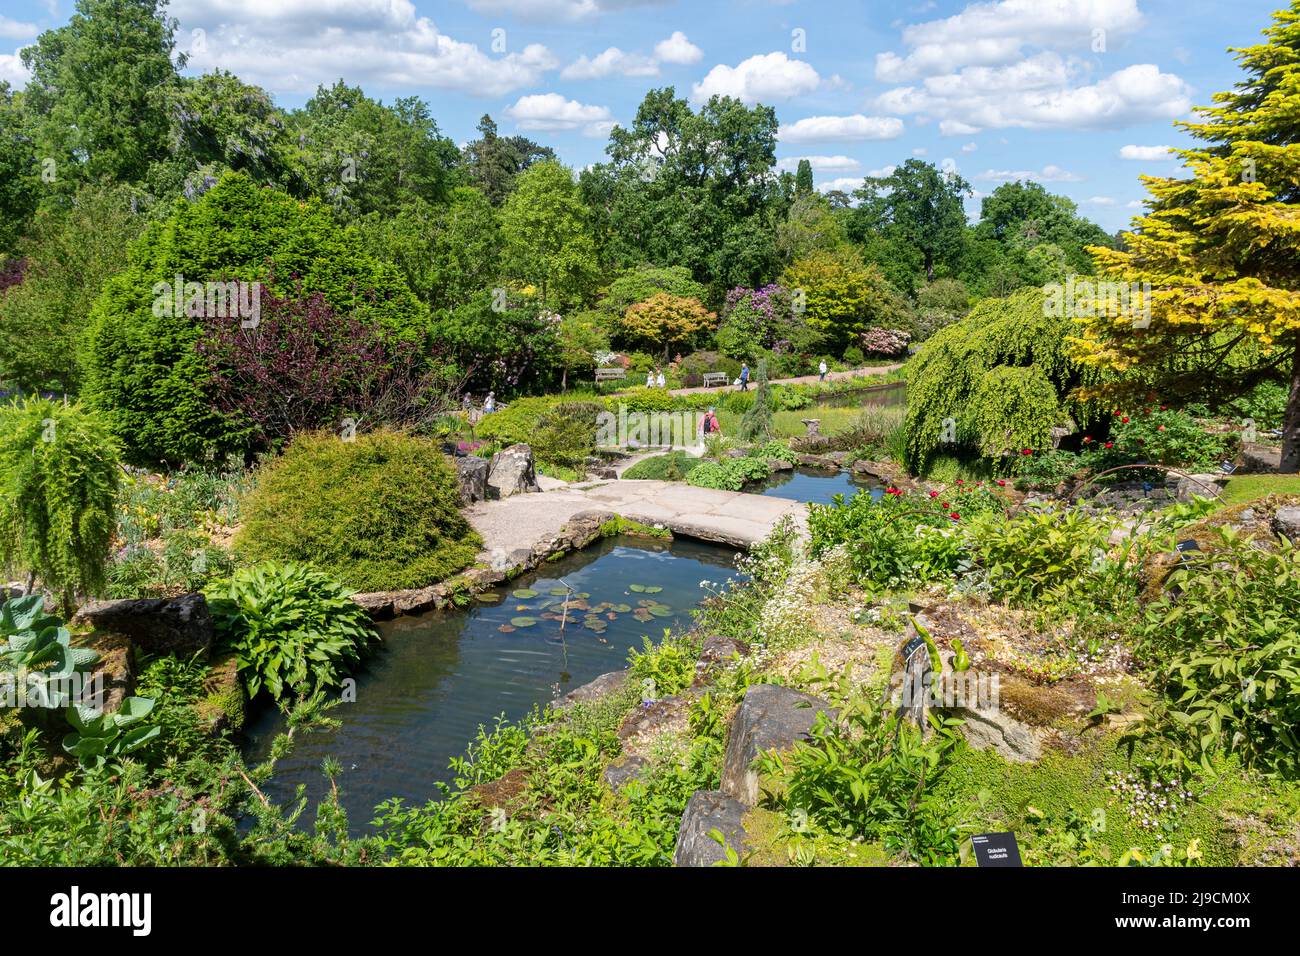 RHS Wisley Garden, view of the Rock Garden during May or late spring, Surrey, England, UK Stock Photo